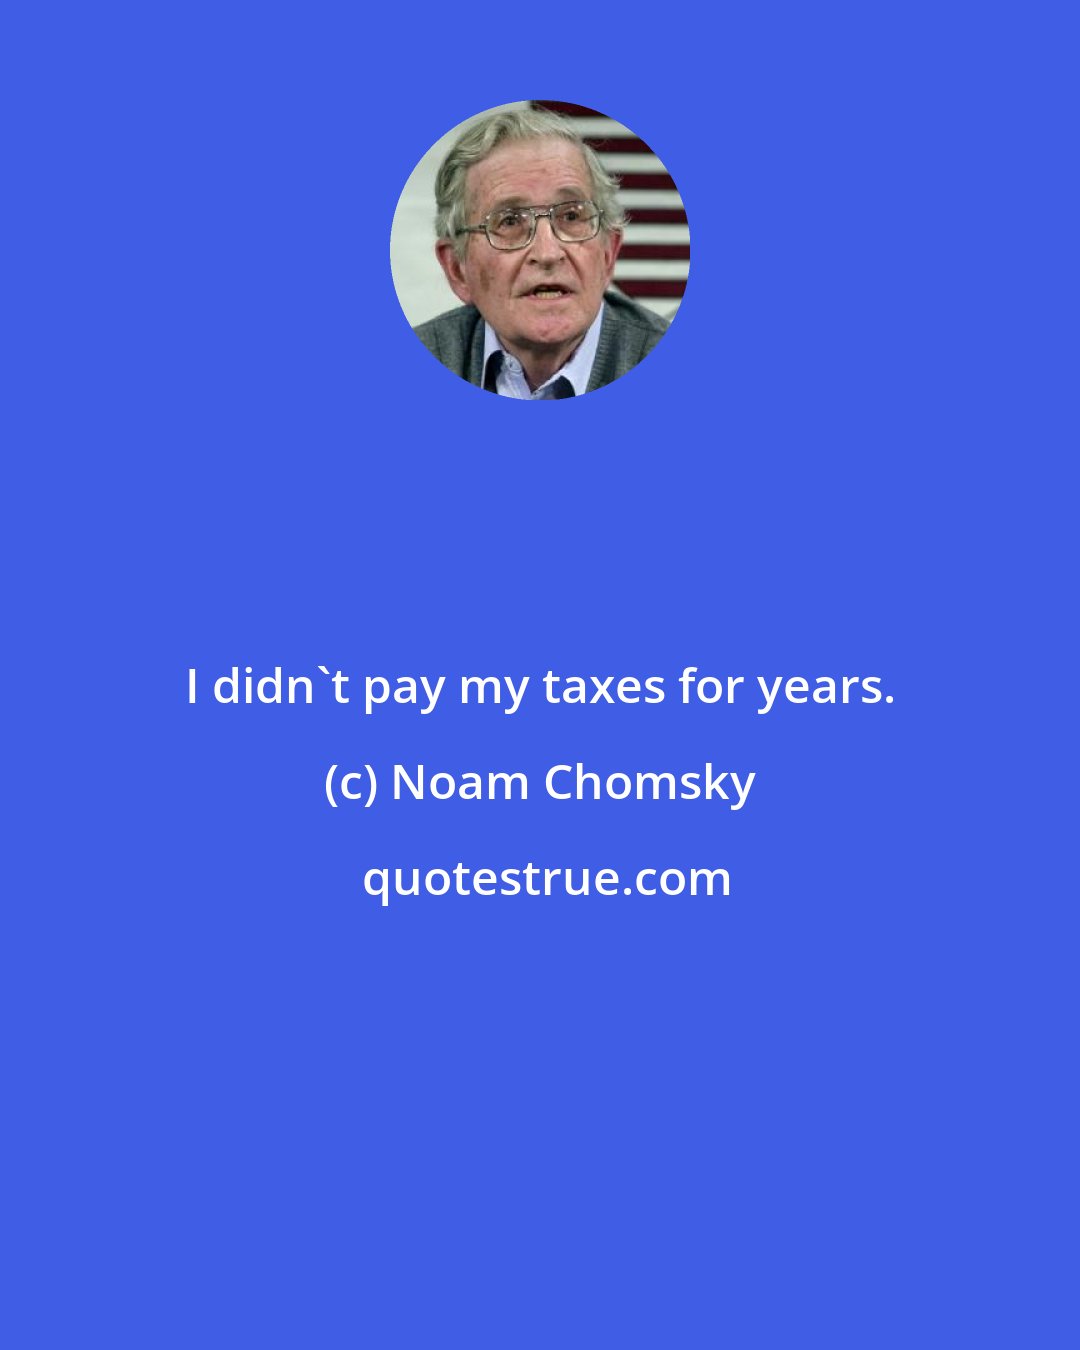 Noam Chomsky: I didn't pay my taxes for years.